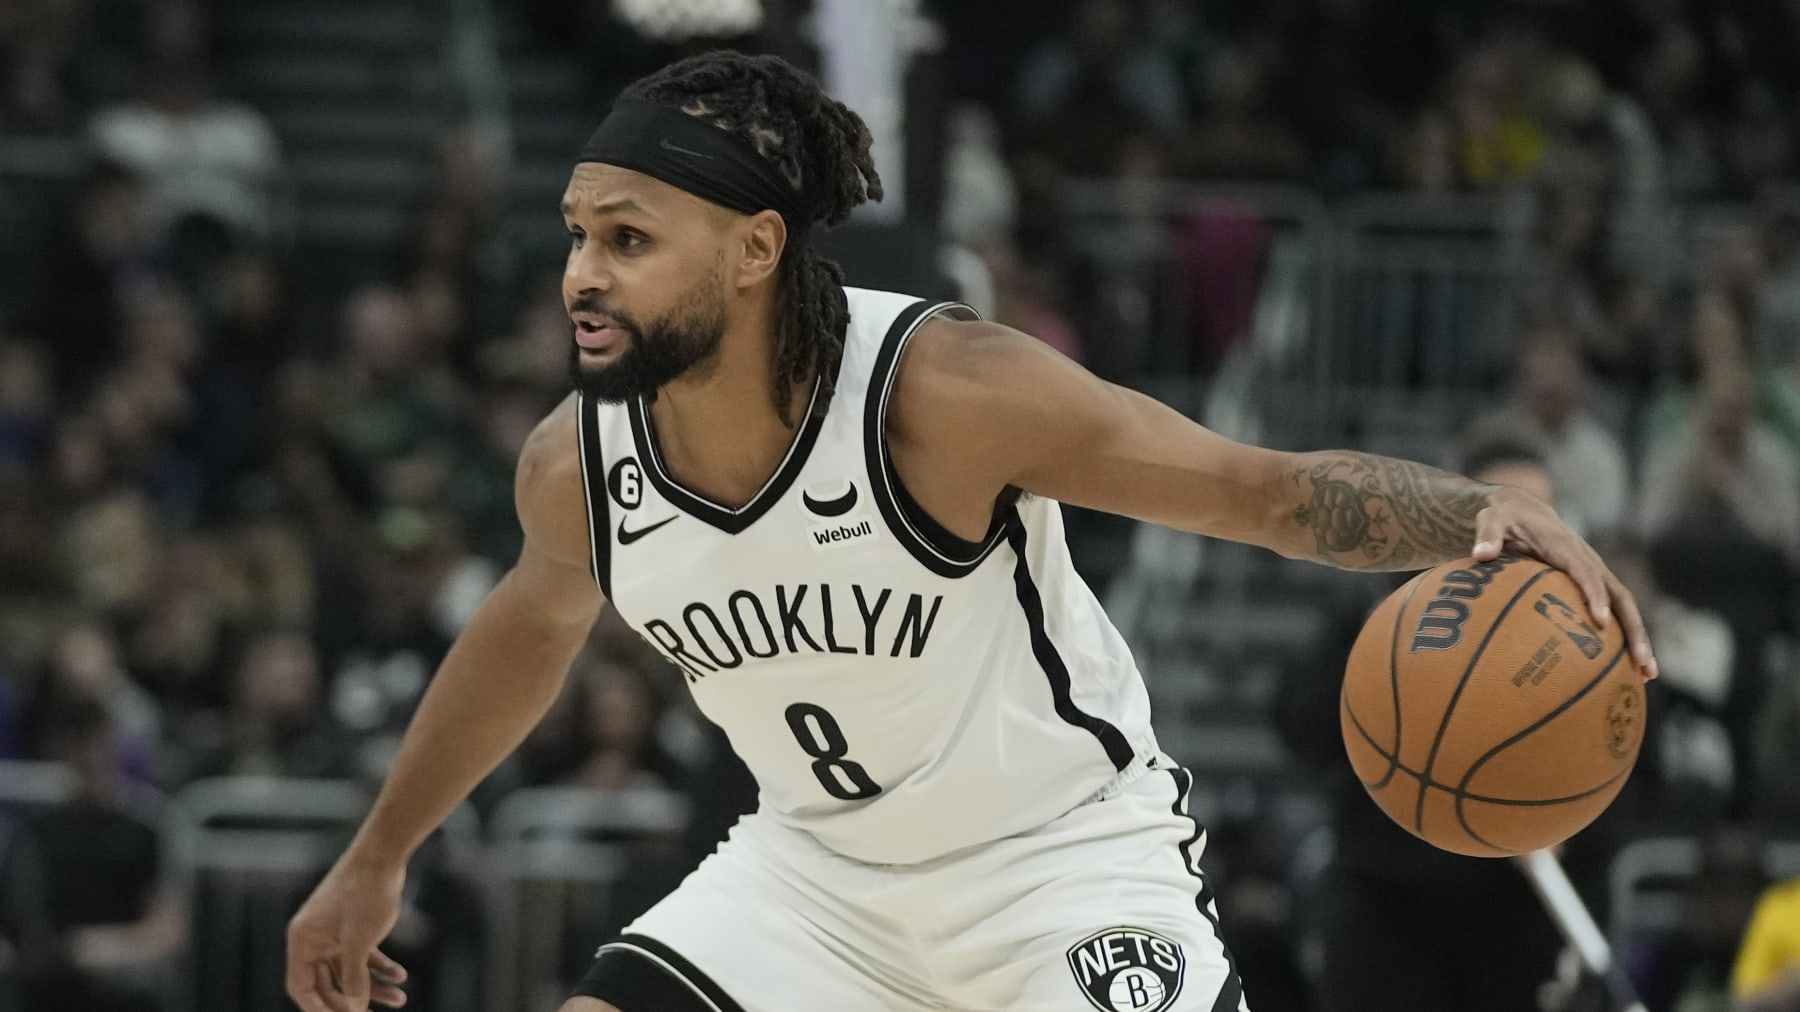 TRADE: Thunder are trading Patty Mills to the Hawks for TyTy